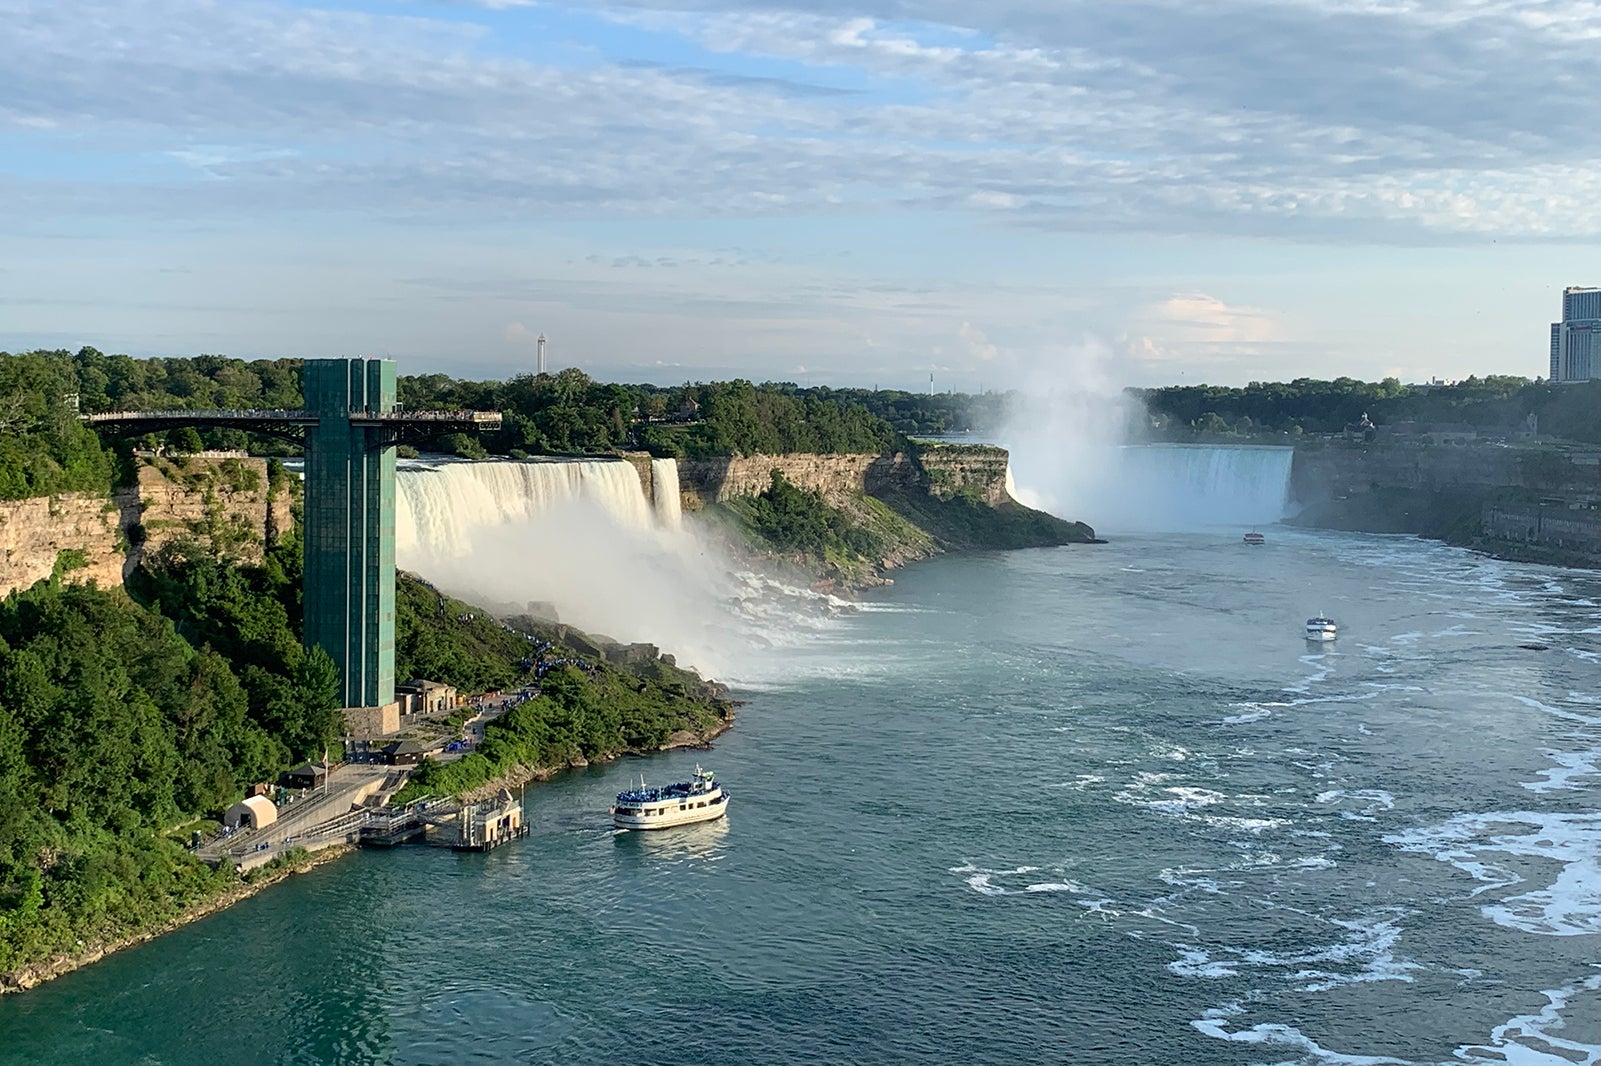 Niagara Falls July 21, 2019. (Photo by Clint Henderson/The Points Guy)